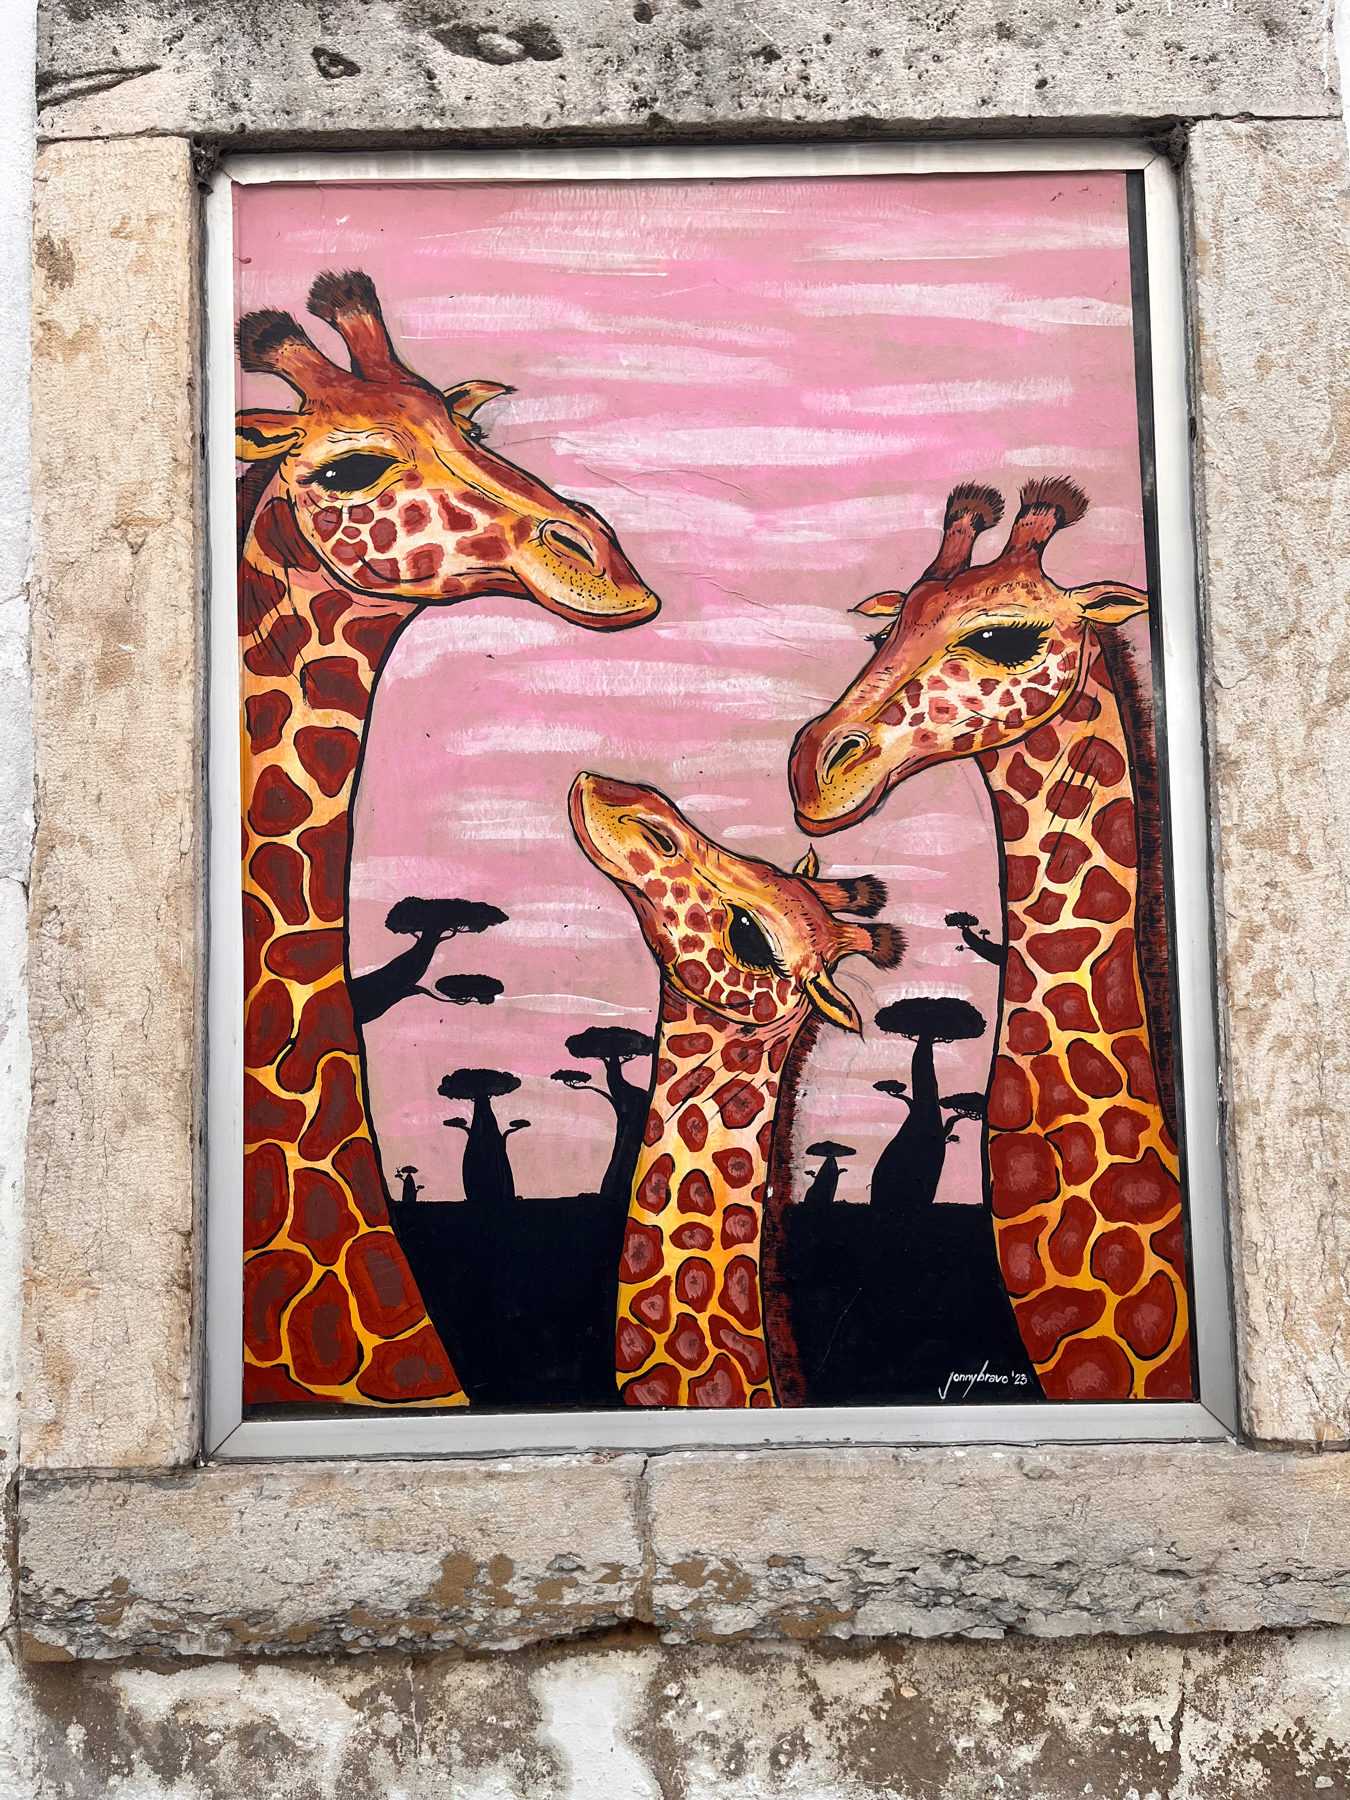 A vibrant painting on an outside wall of three giraffes against a pink background with silhouettes of tree